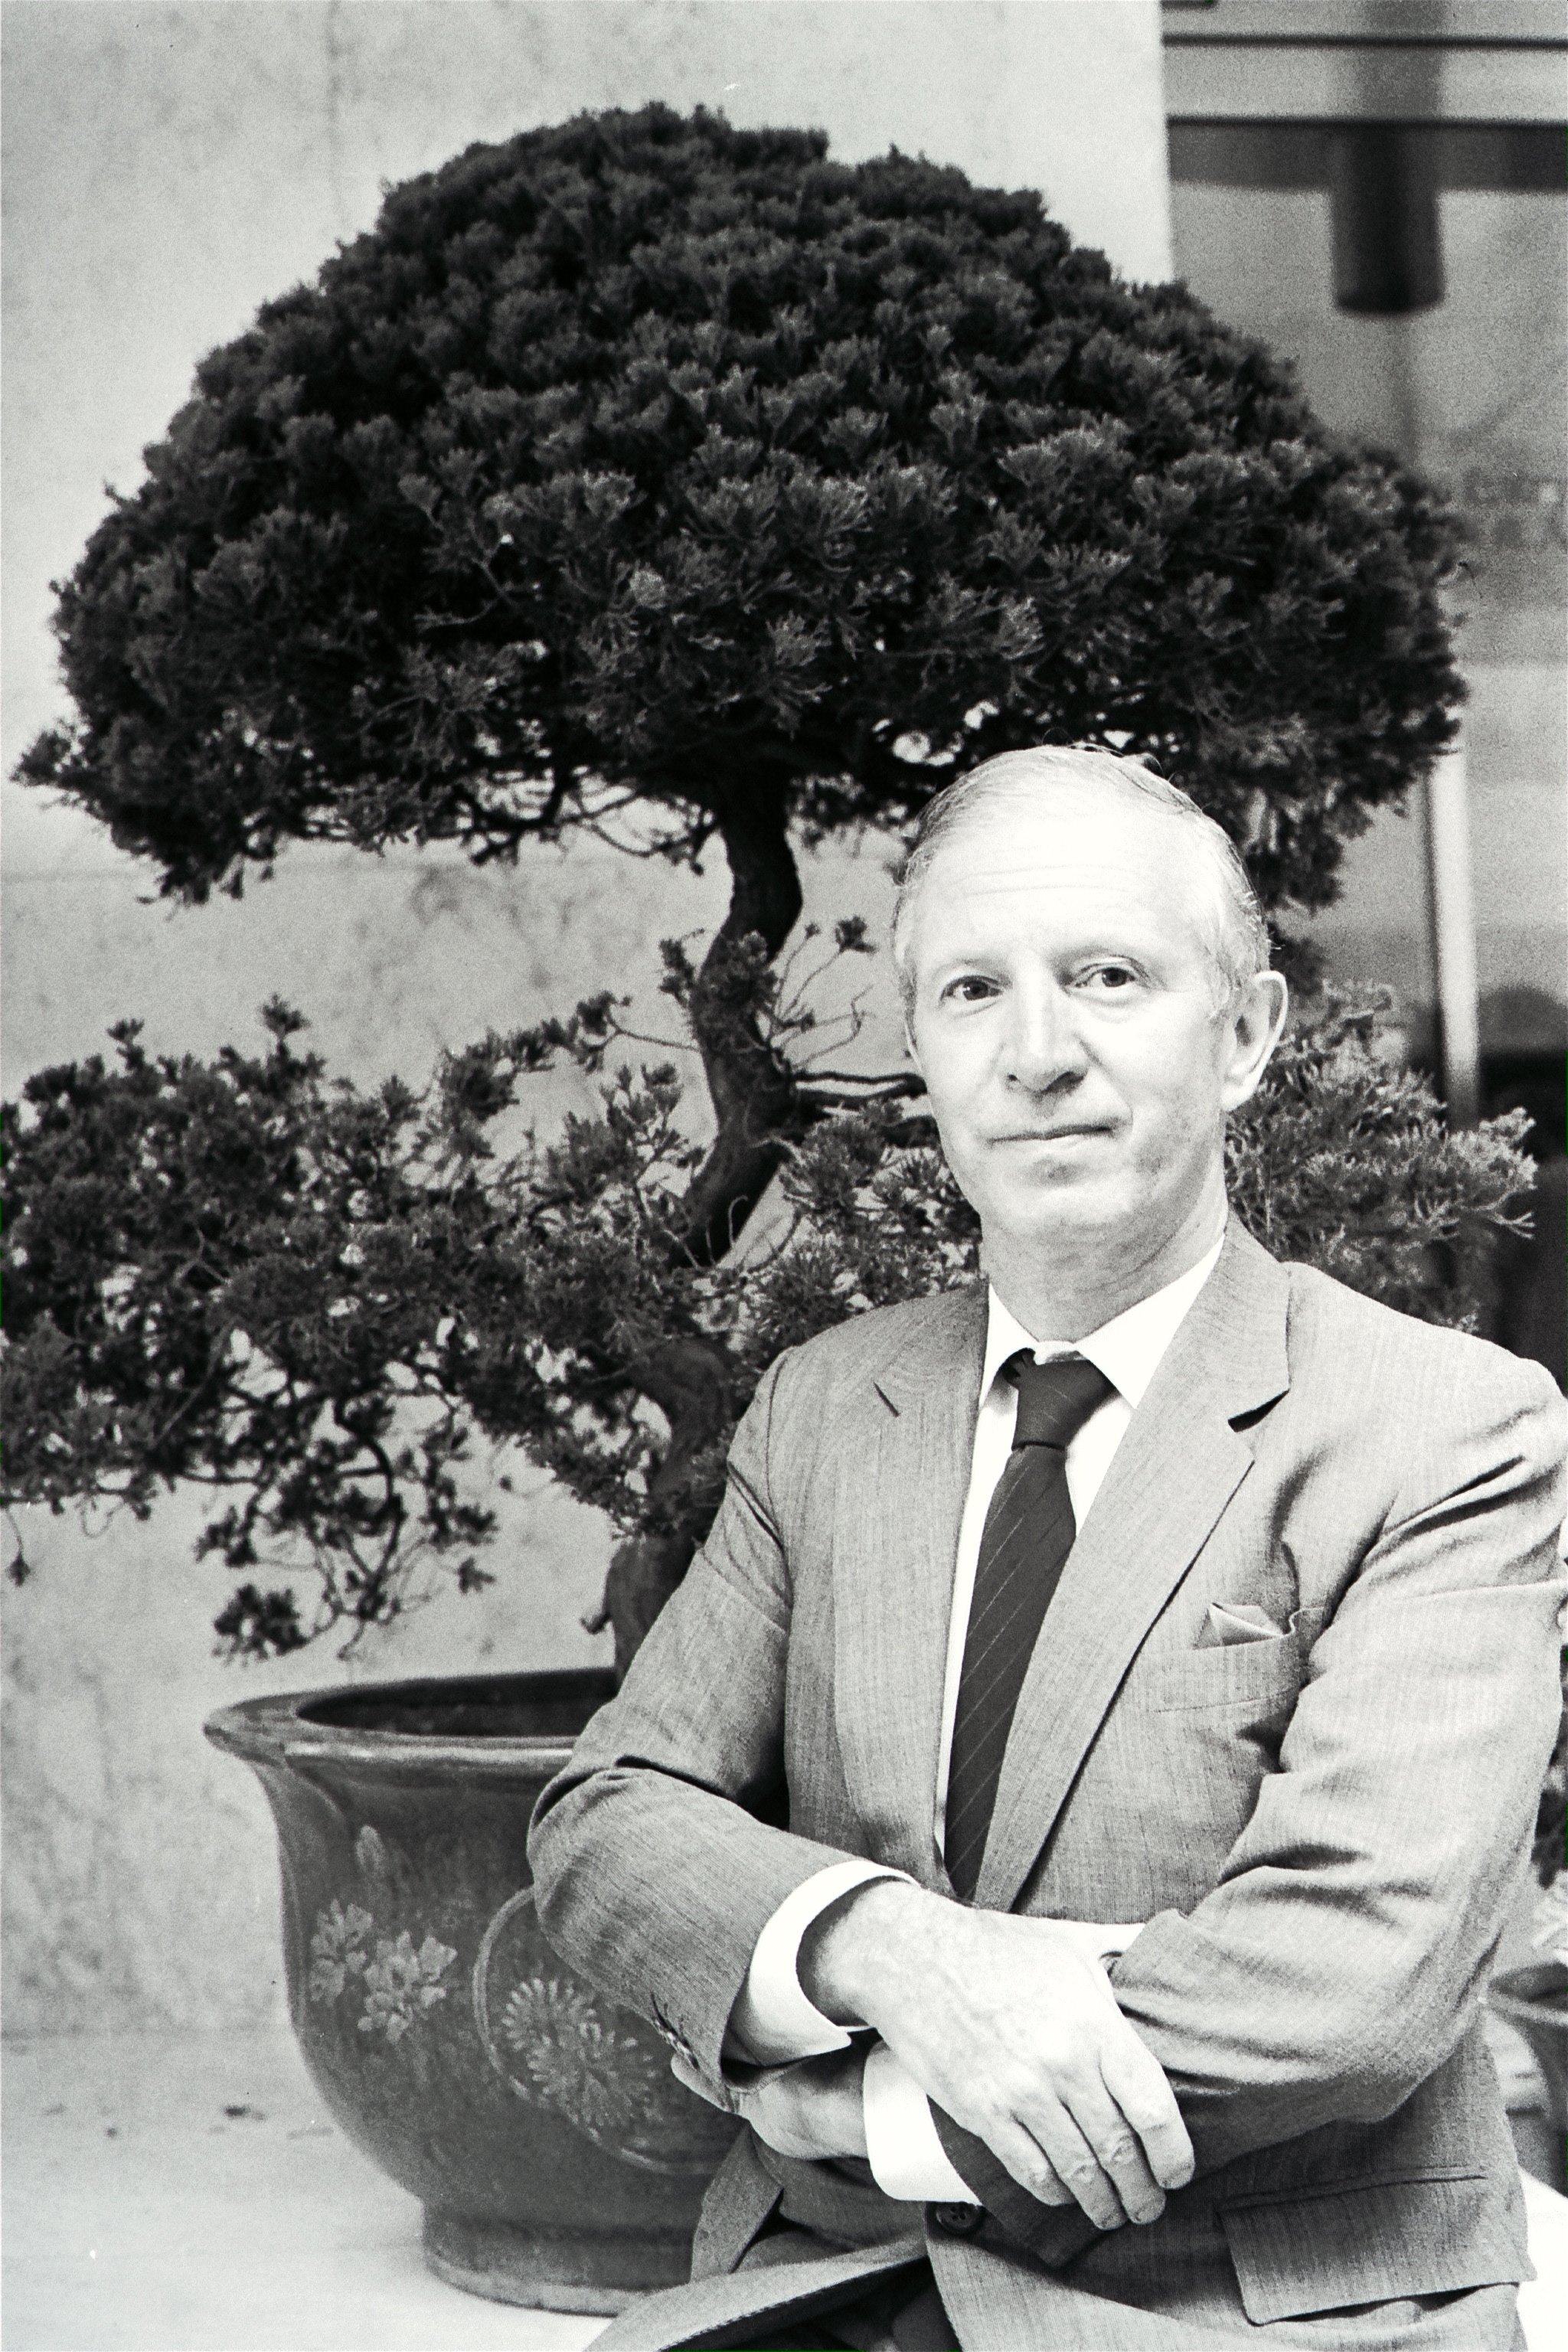 James Hayes, almost the last in an eminent cadre of British scholar-administrators in Hong Kong, wrote extensively about the history and culture of the city’s New Territories where he served. Photo: SCMP